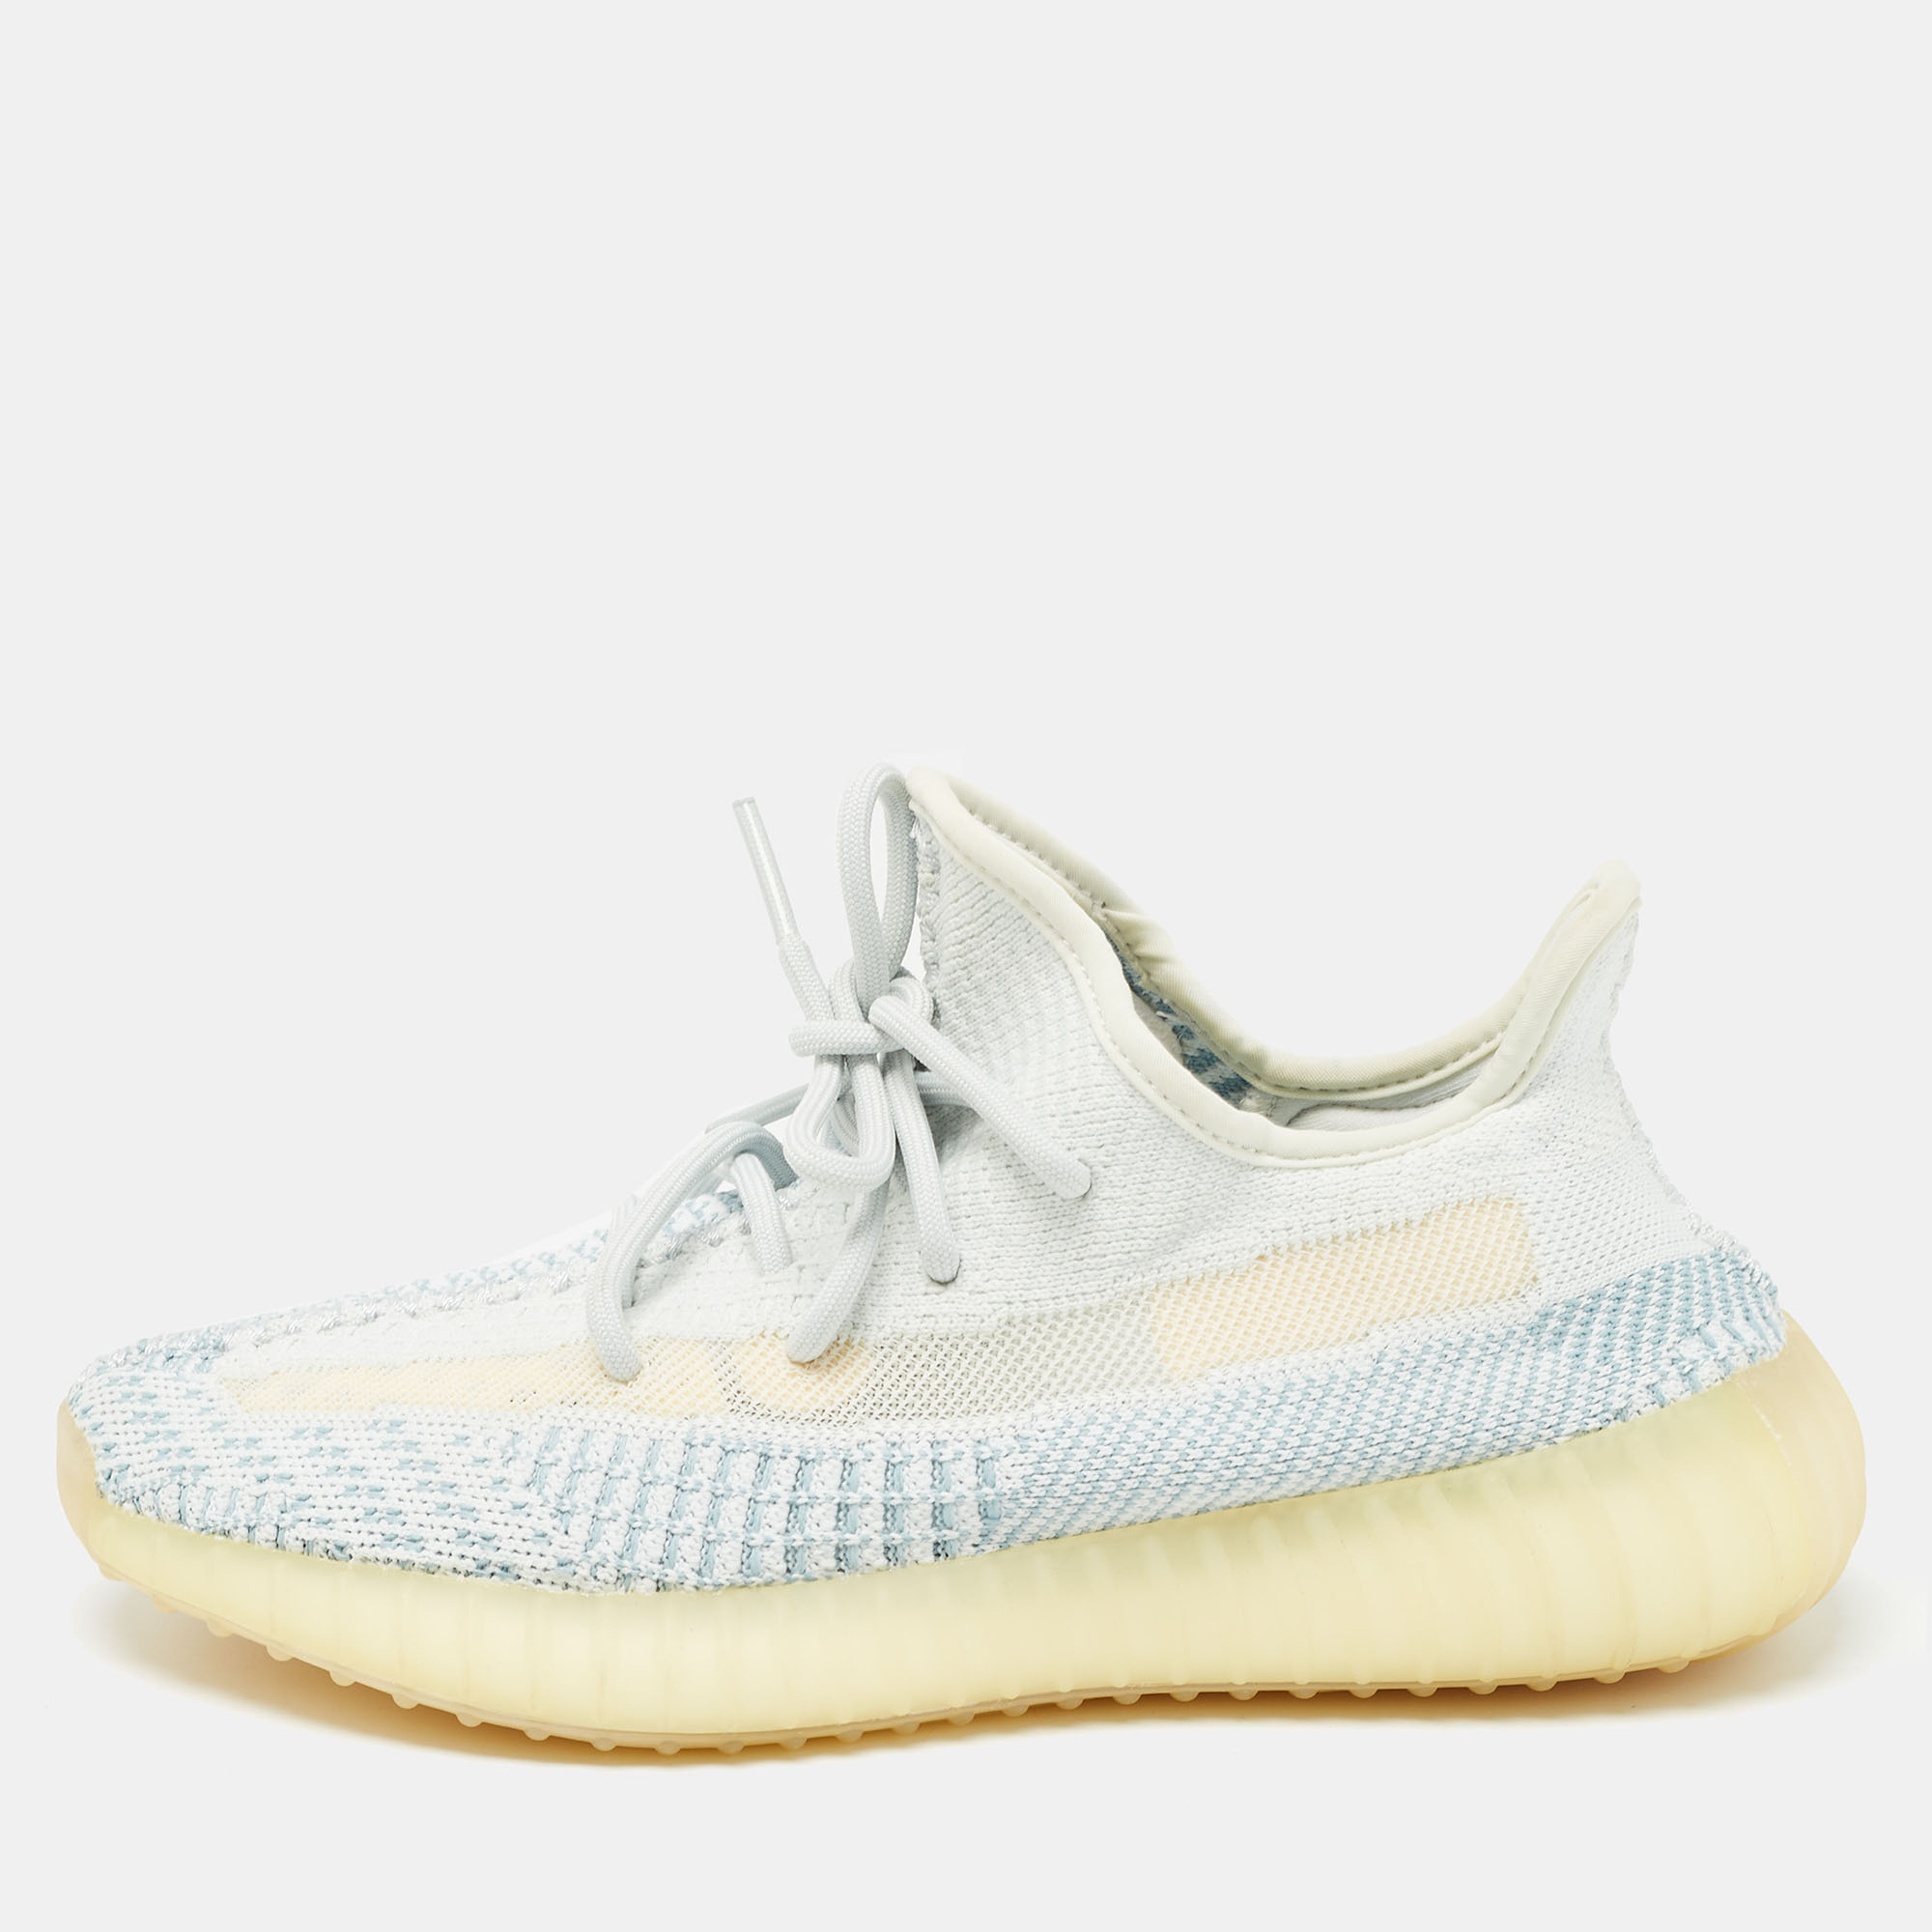 

Yeezy x Adidas Blue/White Knit Fabric Boost 350 V2 Cloud White Sneakers Size 38 2/3